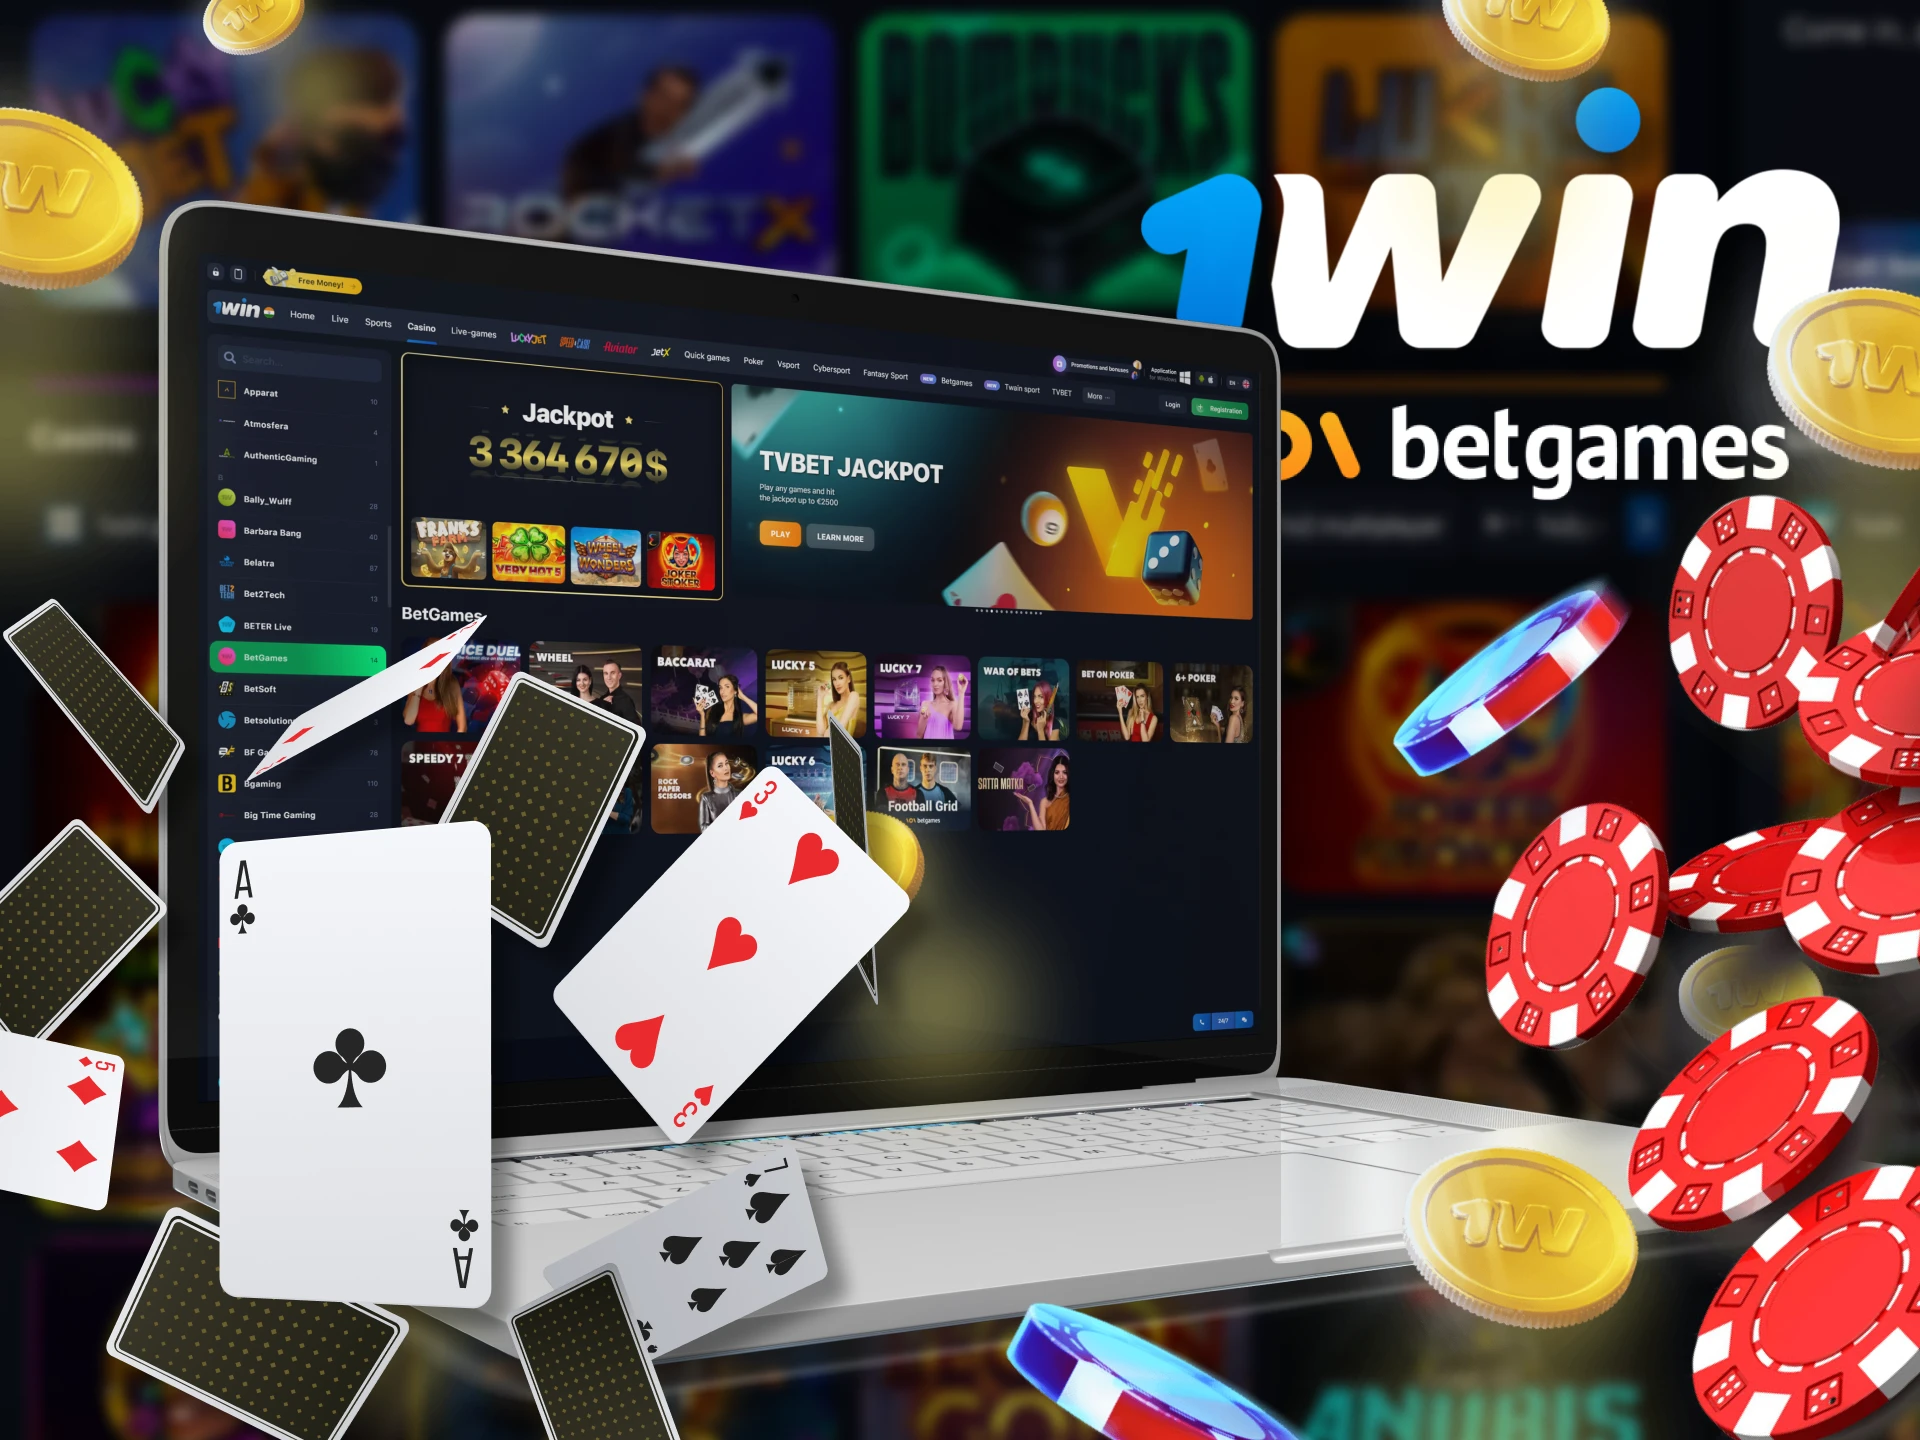 You can play many card games from BetGames at 1Win Casino.